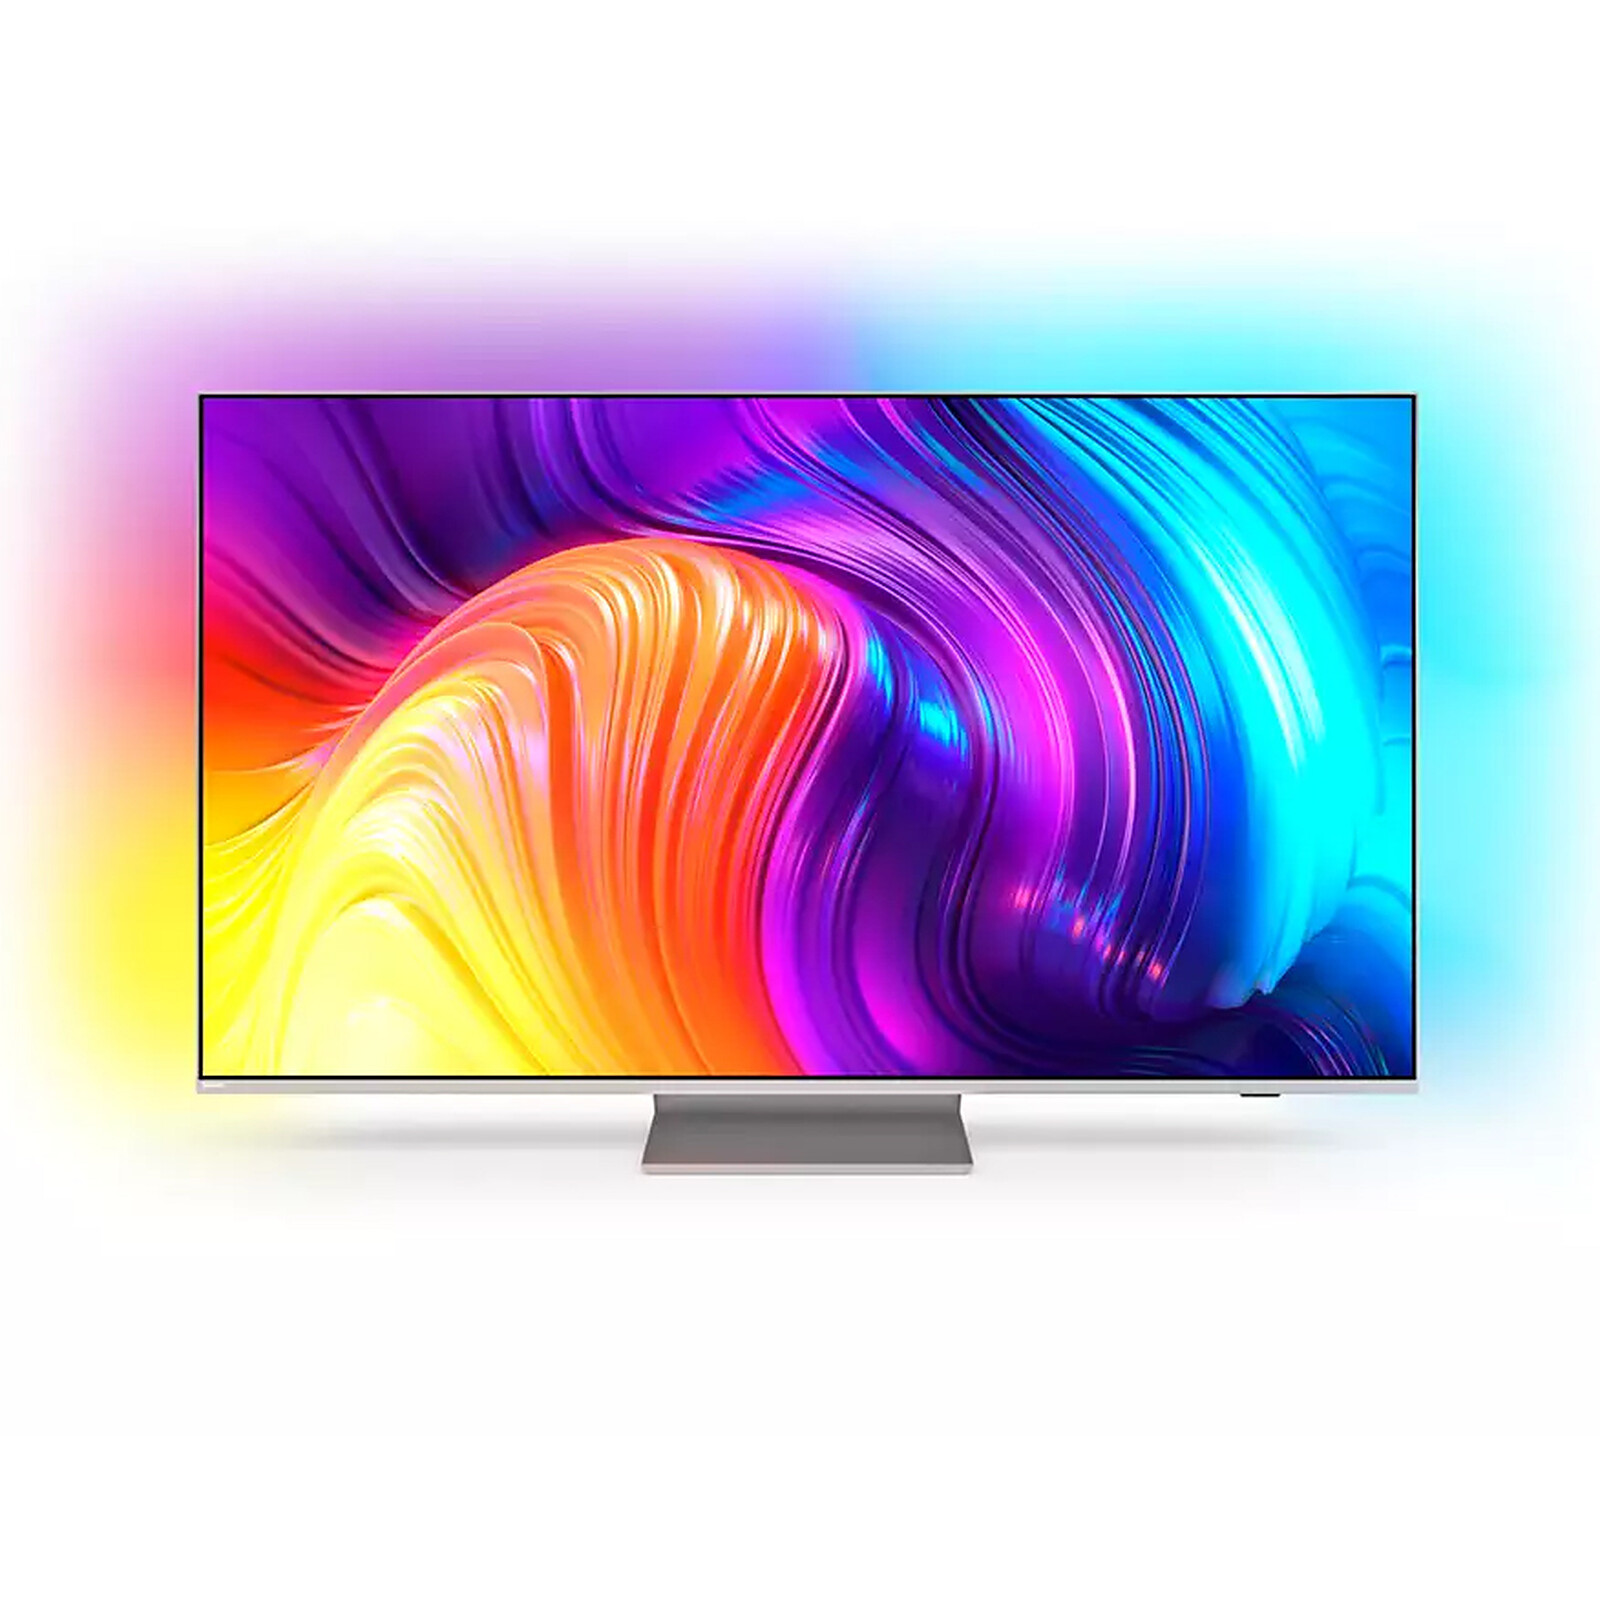 Buy PHILIPS Ambilight 50PUS8108/12 50 Smart 4K Ultra HD HDR LED TV with   Alexa